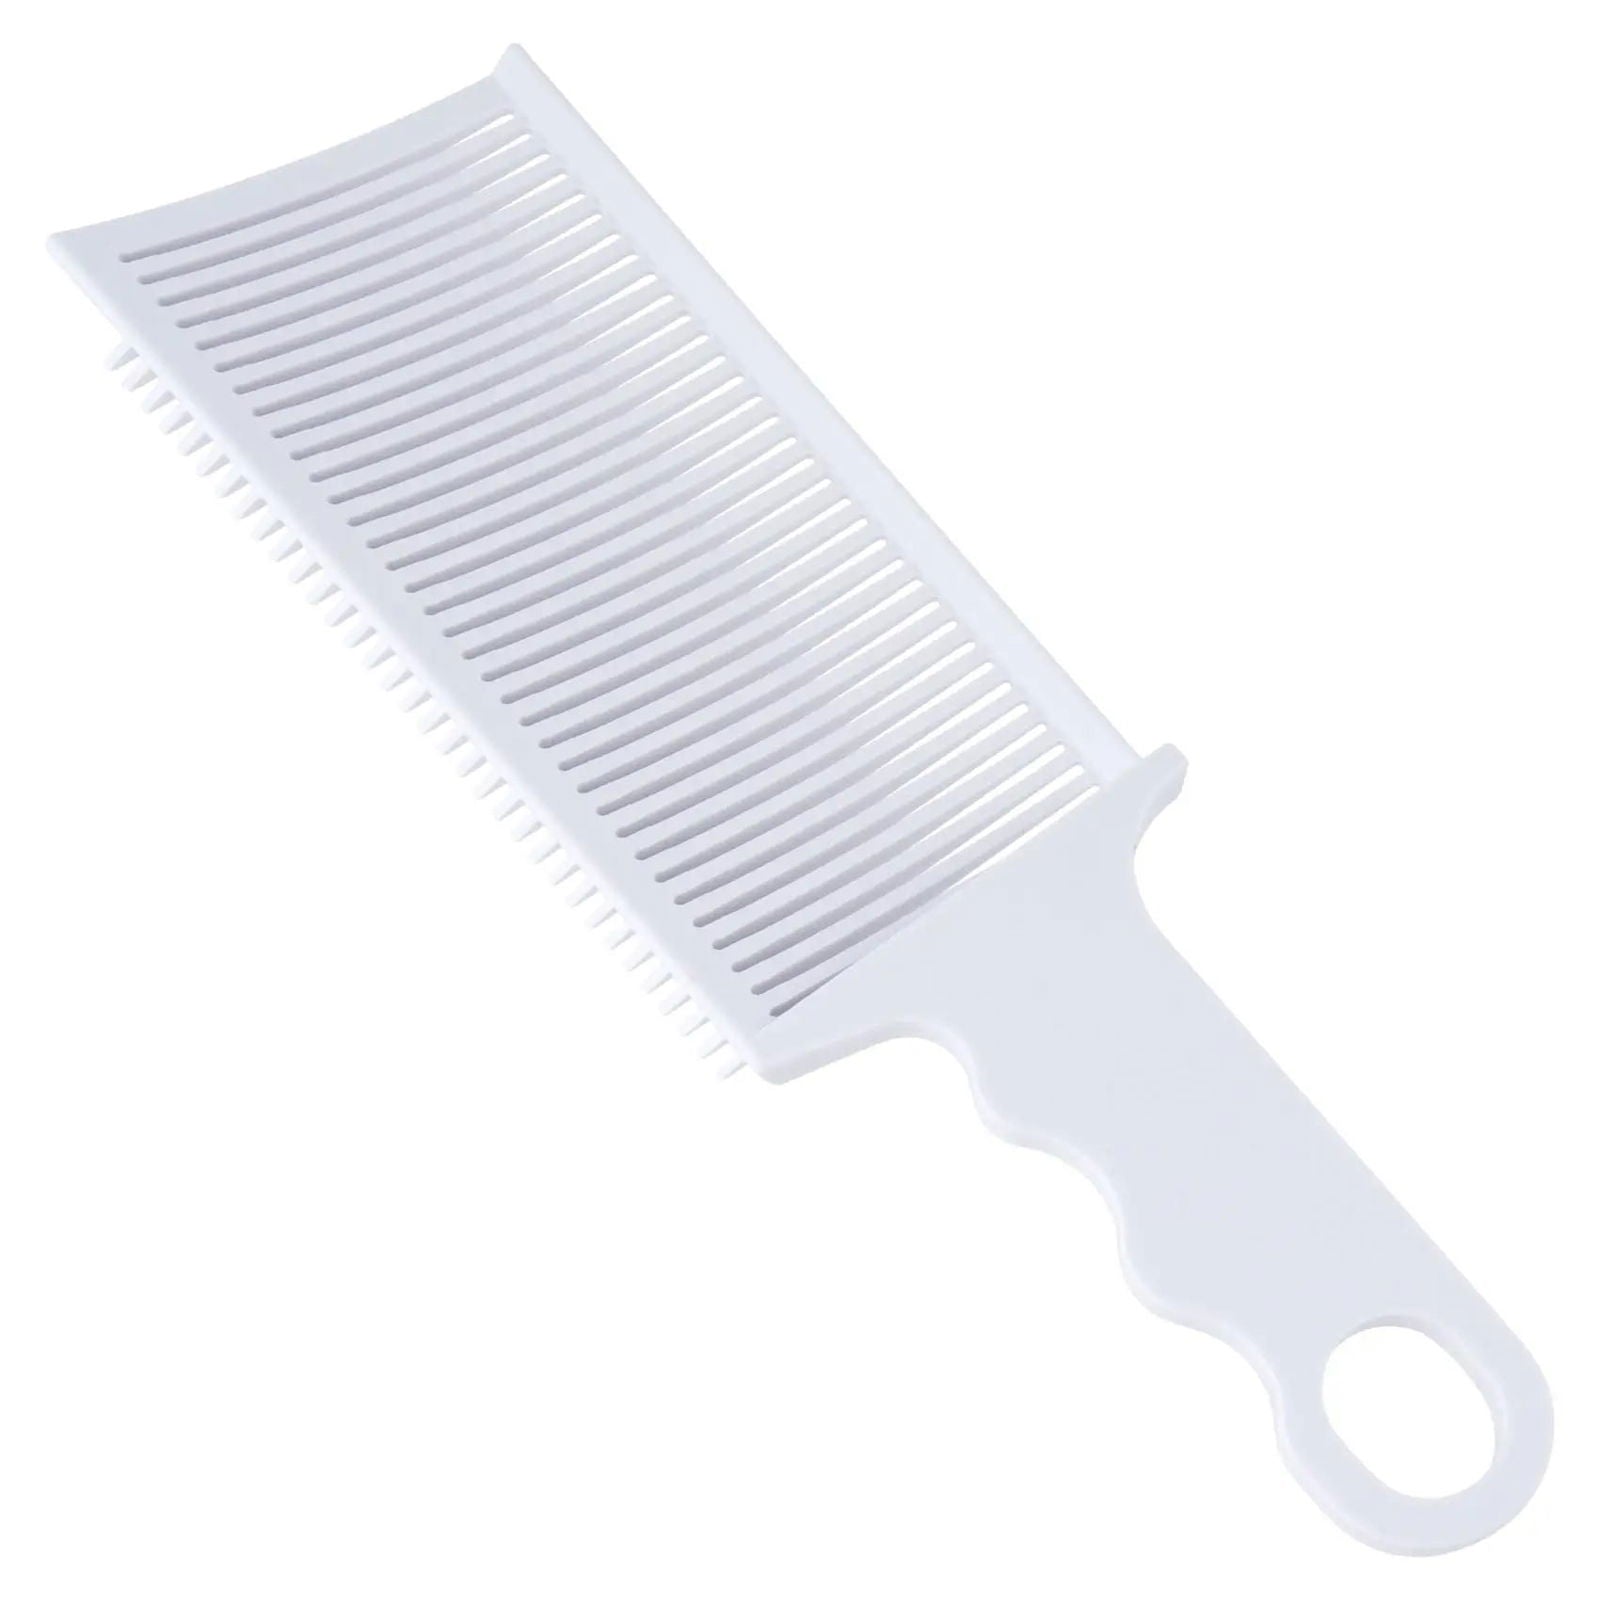 Professional Curved Positioning Comb for Men Portable Hairdressing Tool, Haircut Clipper Comb for Home Salon - ARCHE